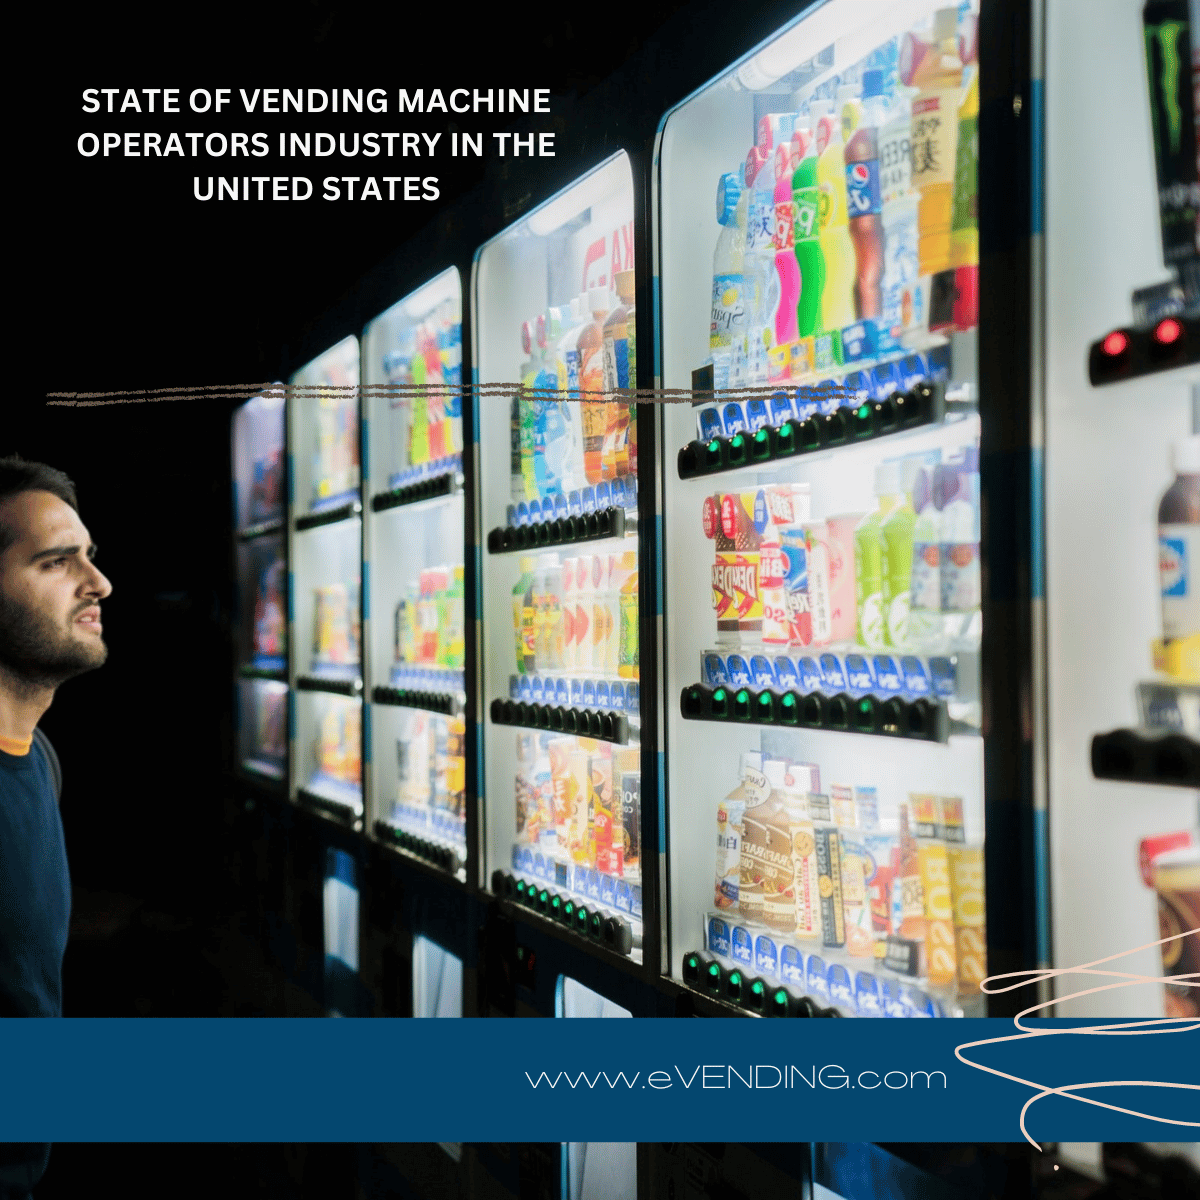 STATE OF VENDING MACHINE OPERATORS INDUSTRY IN THE UNITED STATES